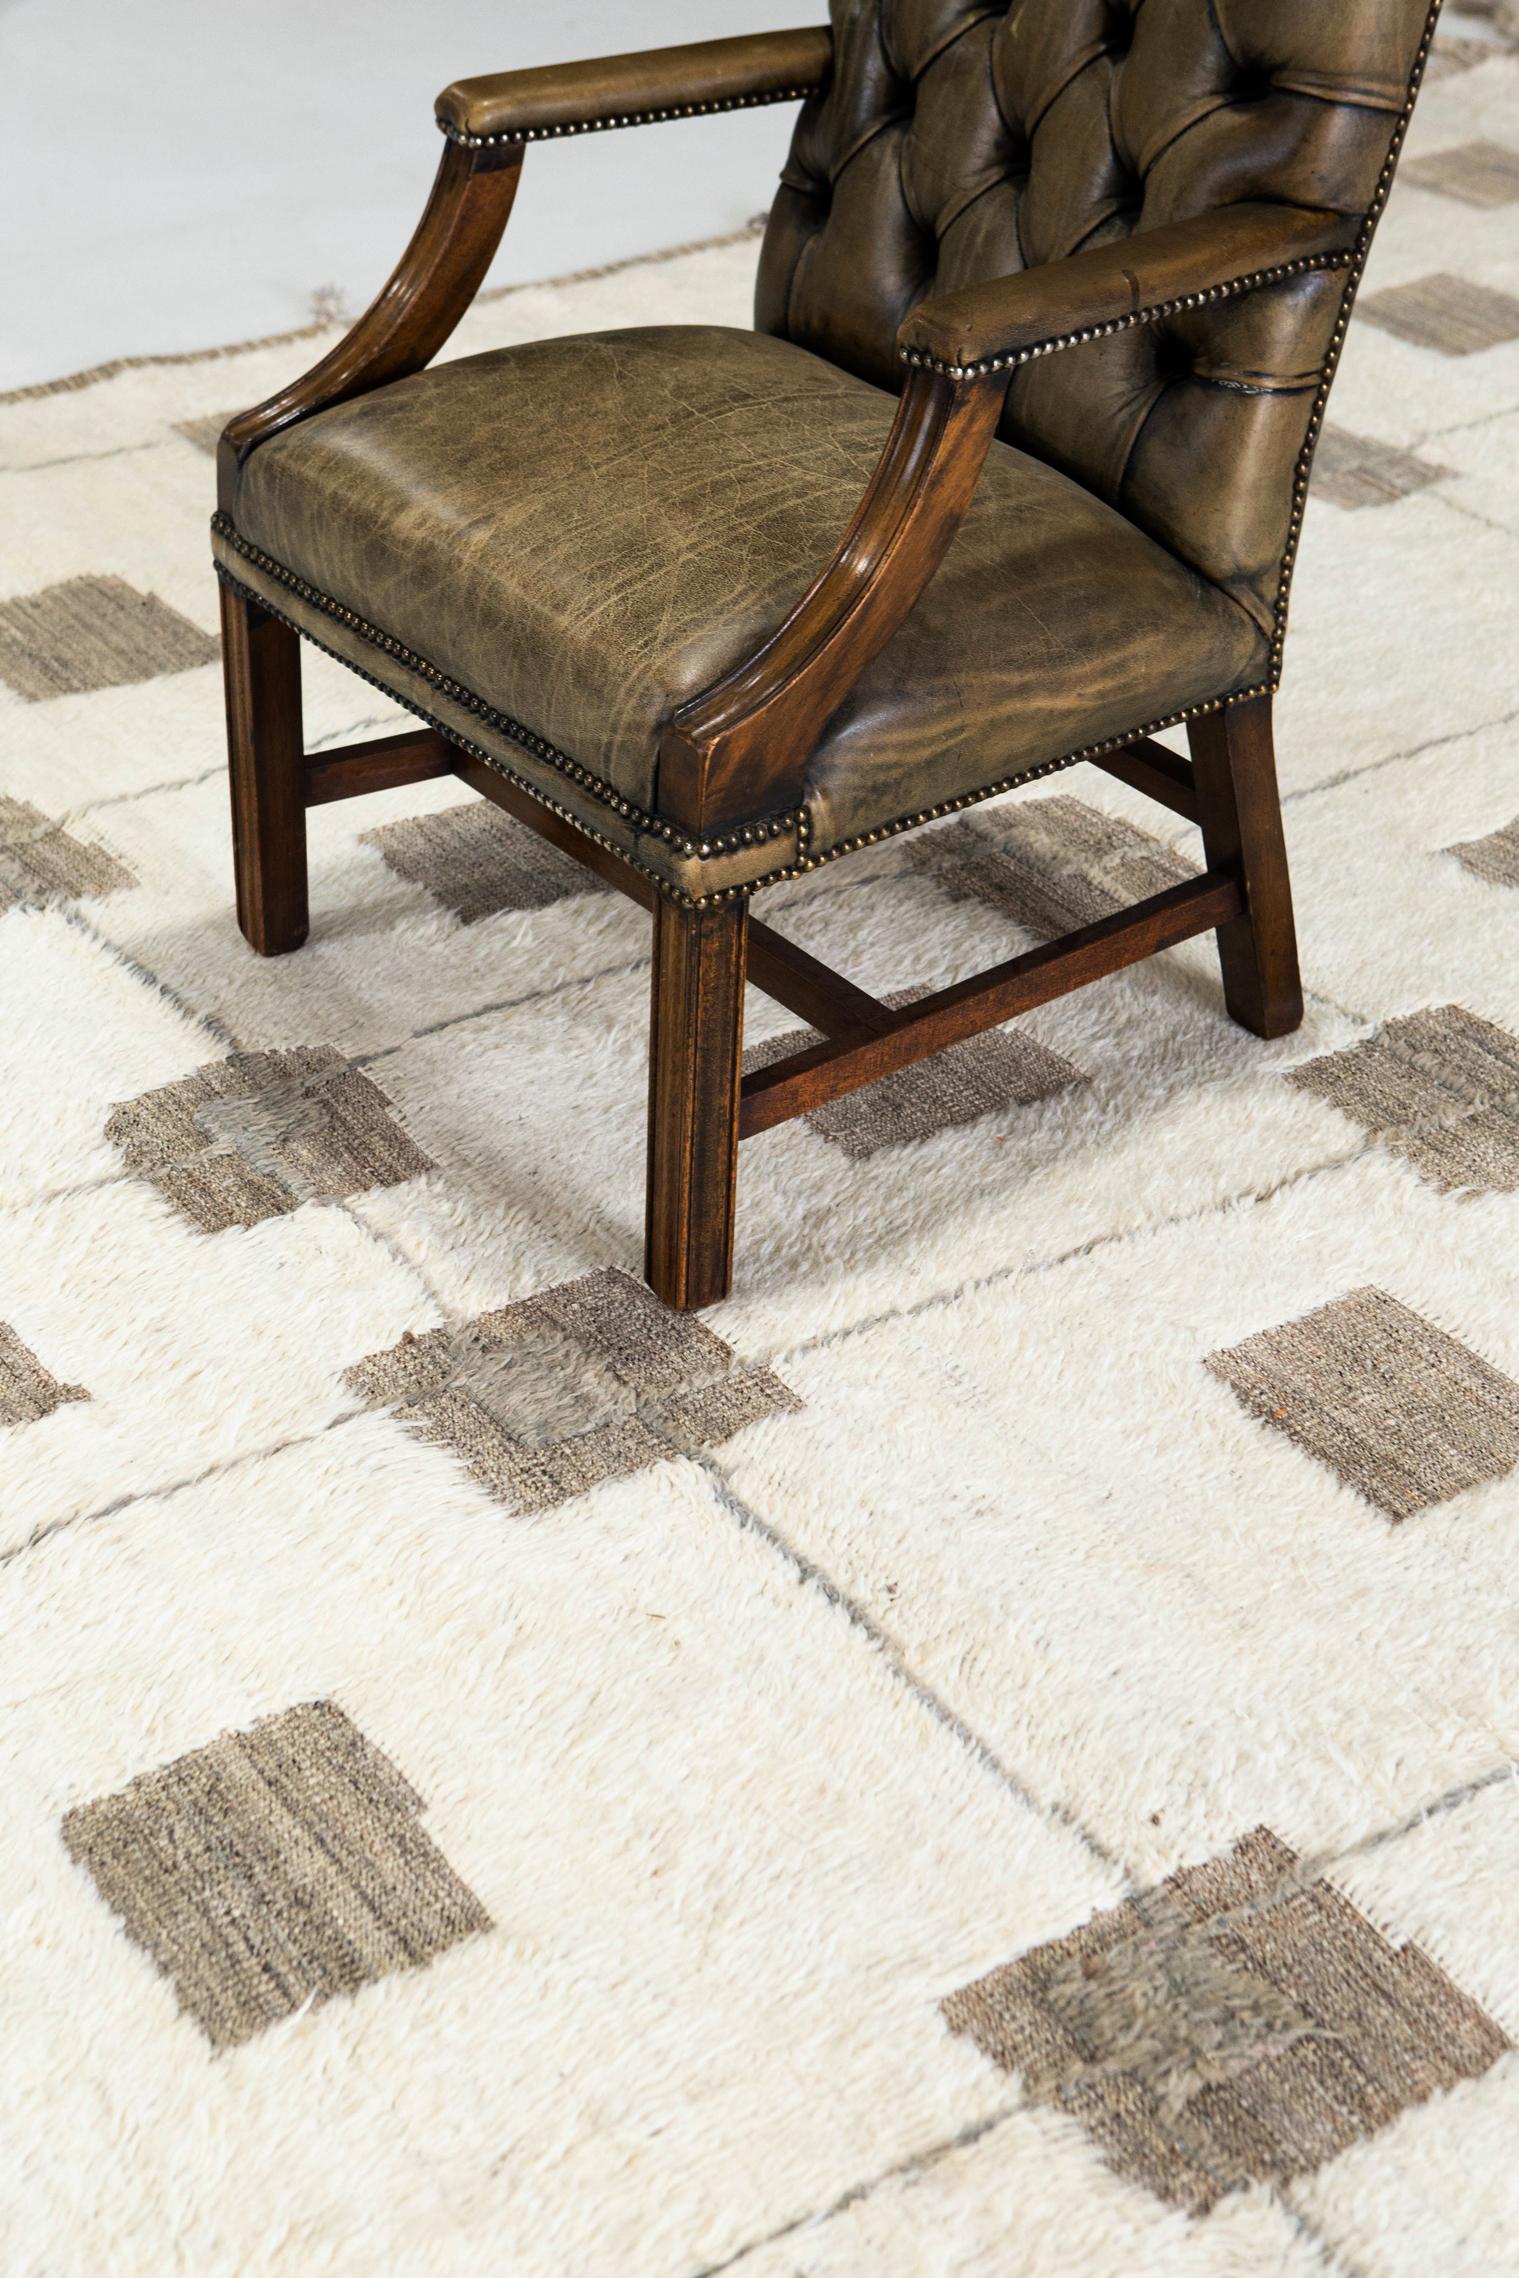 Taghazout' rug is a handwoven wool piece inspired by vintage Scandinavian design elements and recreated for the modern design world. The rug's shag balance and embossed designs bring a unique and playful essence. This collection, 'Kust' also meaning